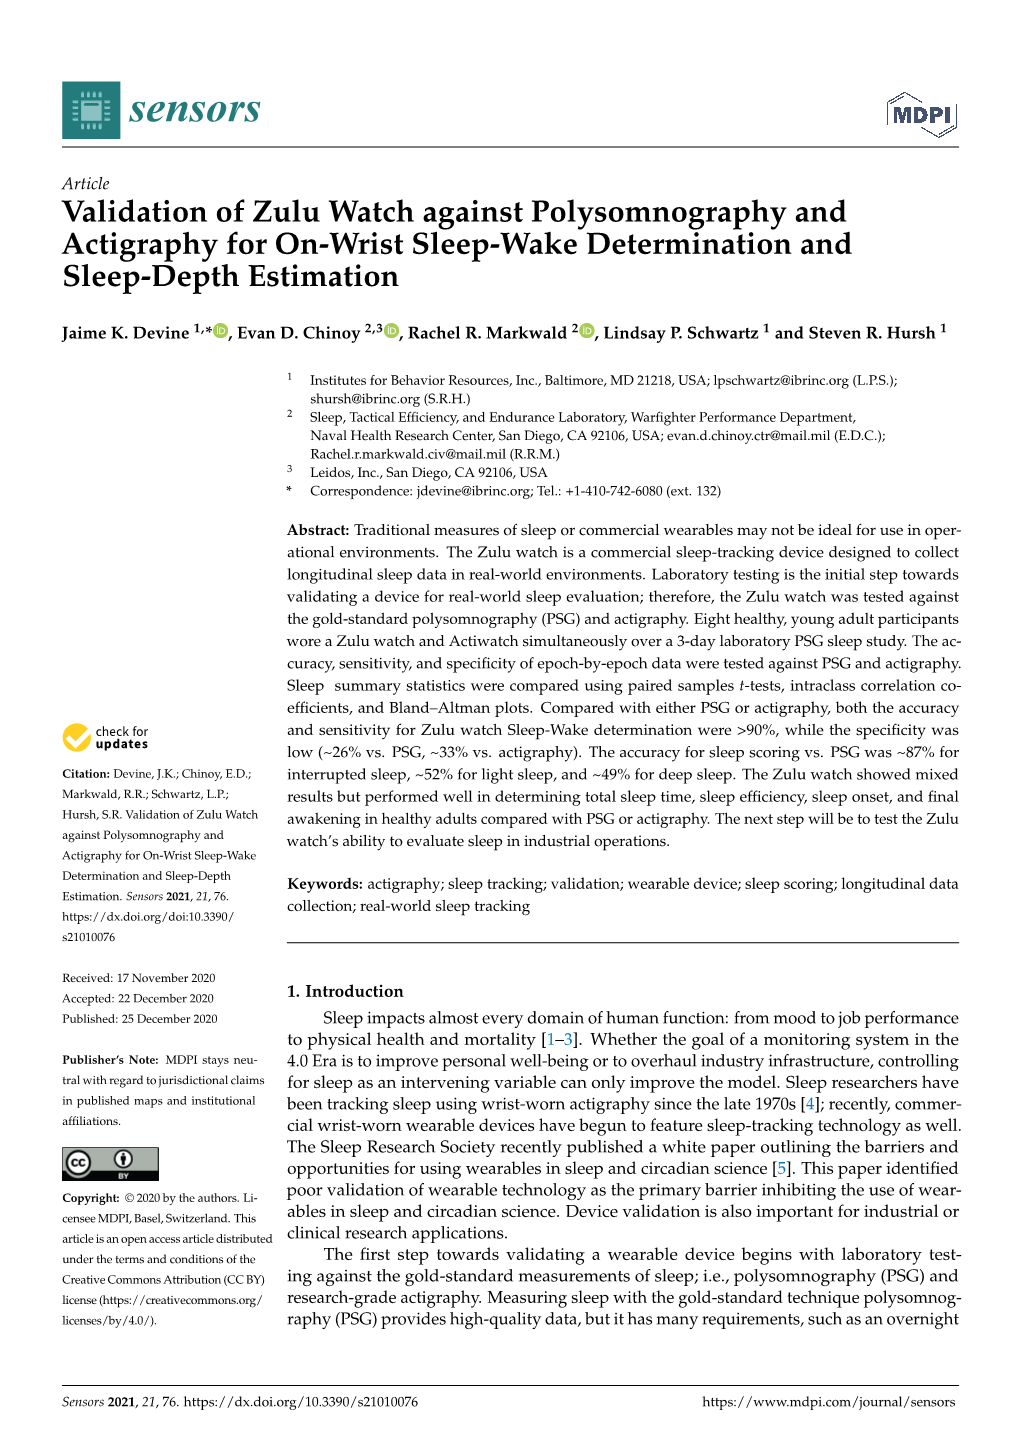 Validation of Zulu Watch Against Polysomnography and Actigraphy for On-Wrist Sleep-Wake Determination and Sleep-Depth Estimation